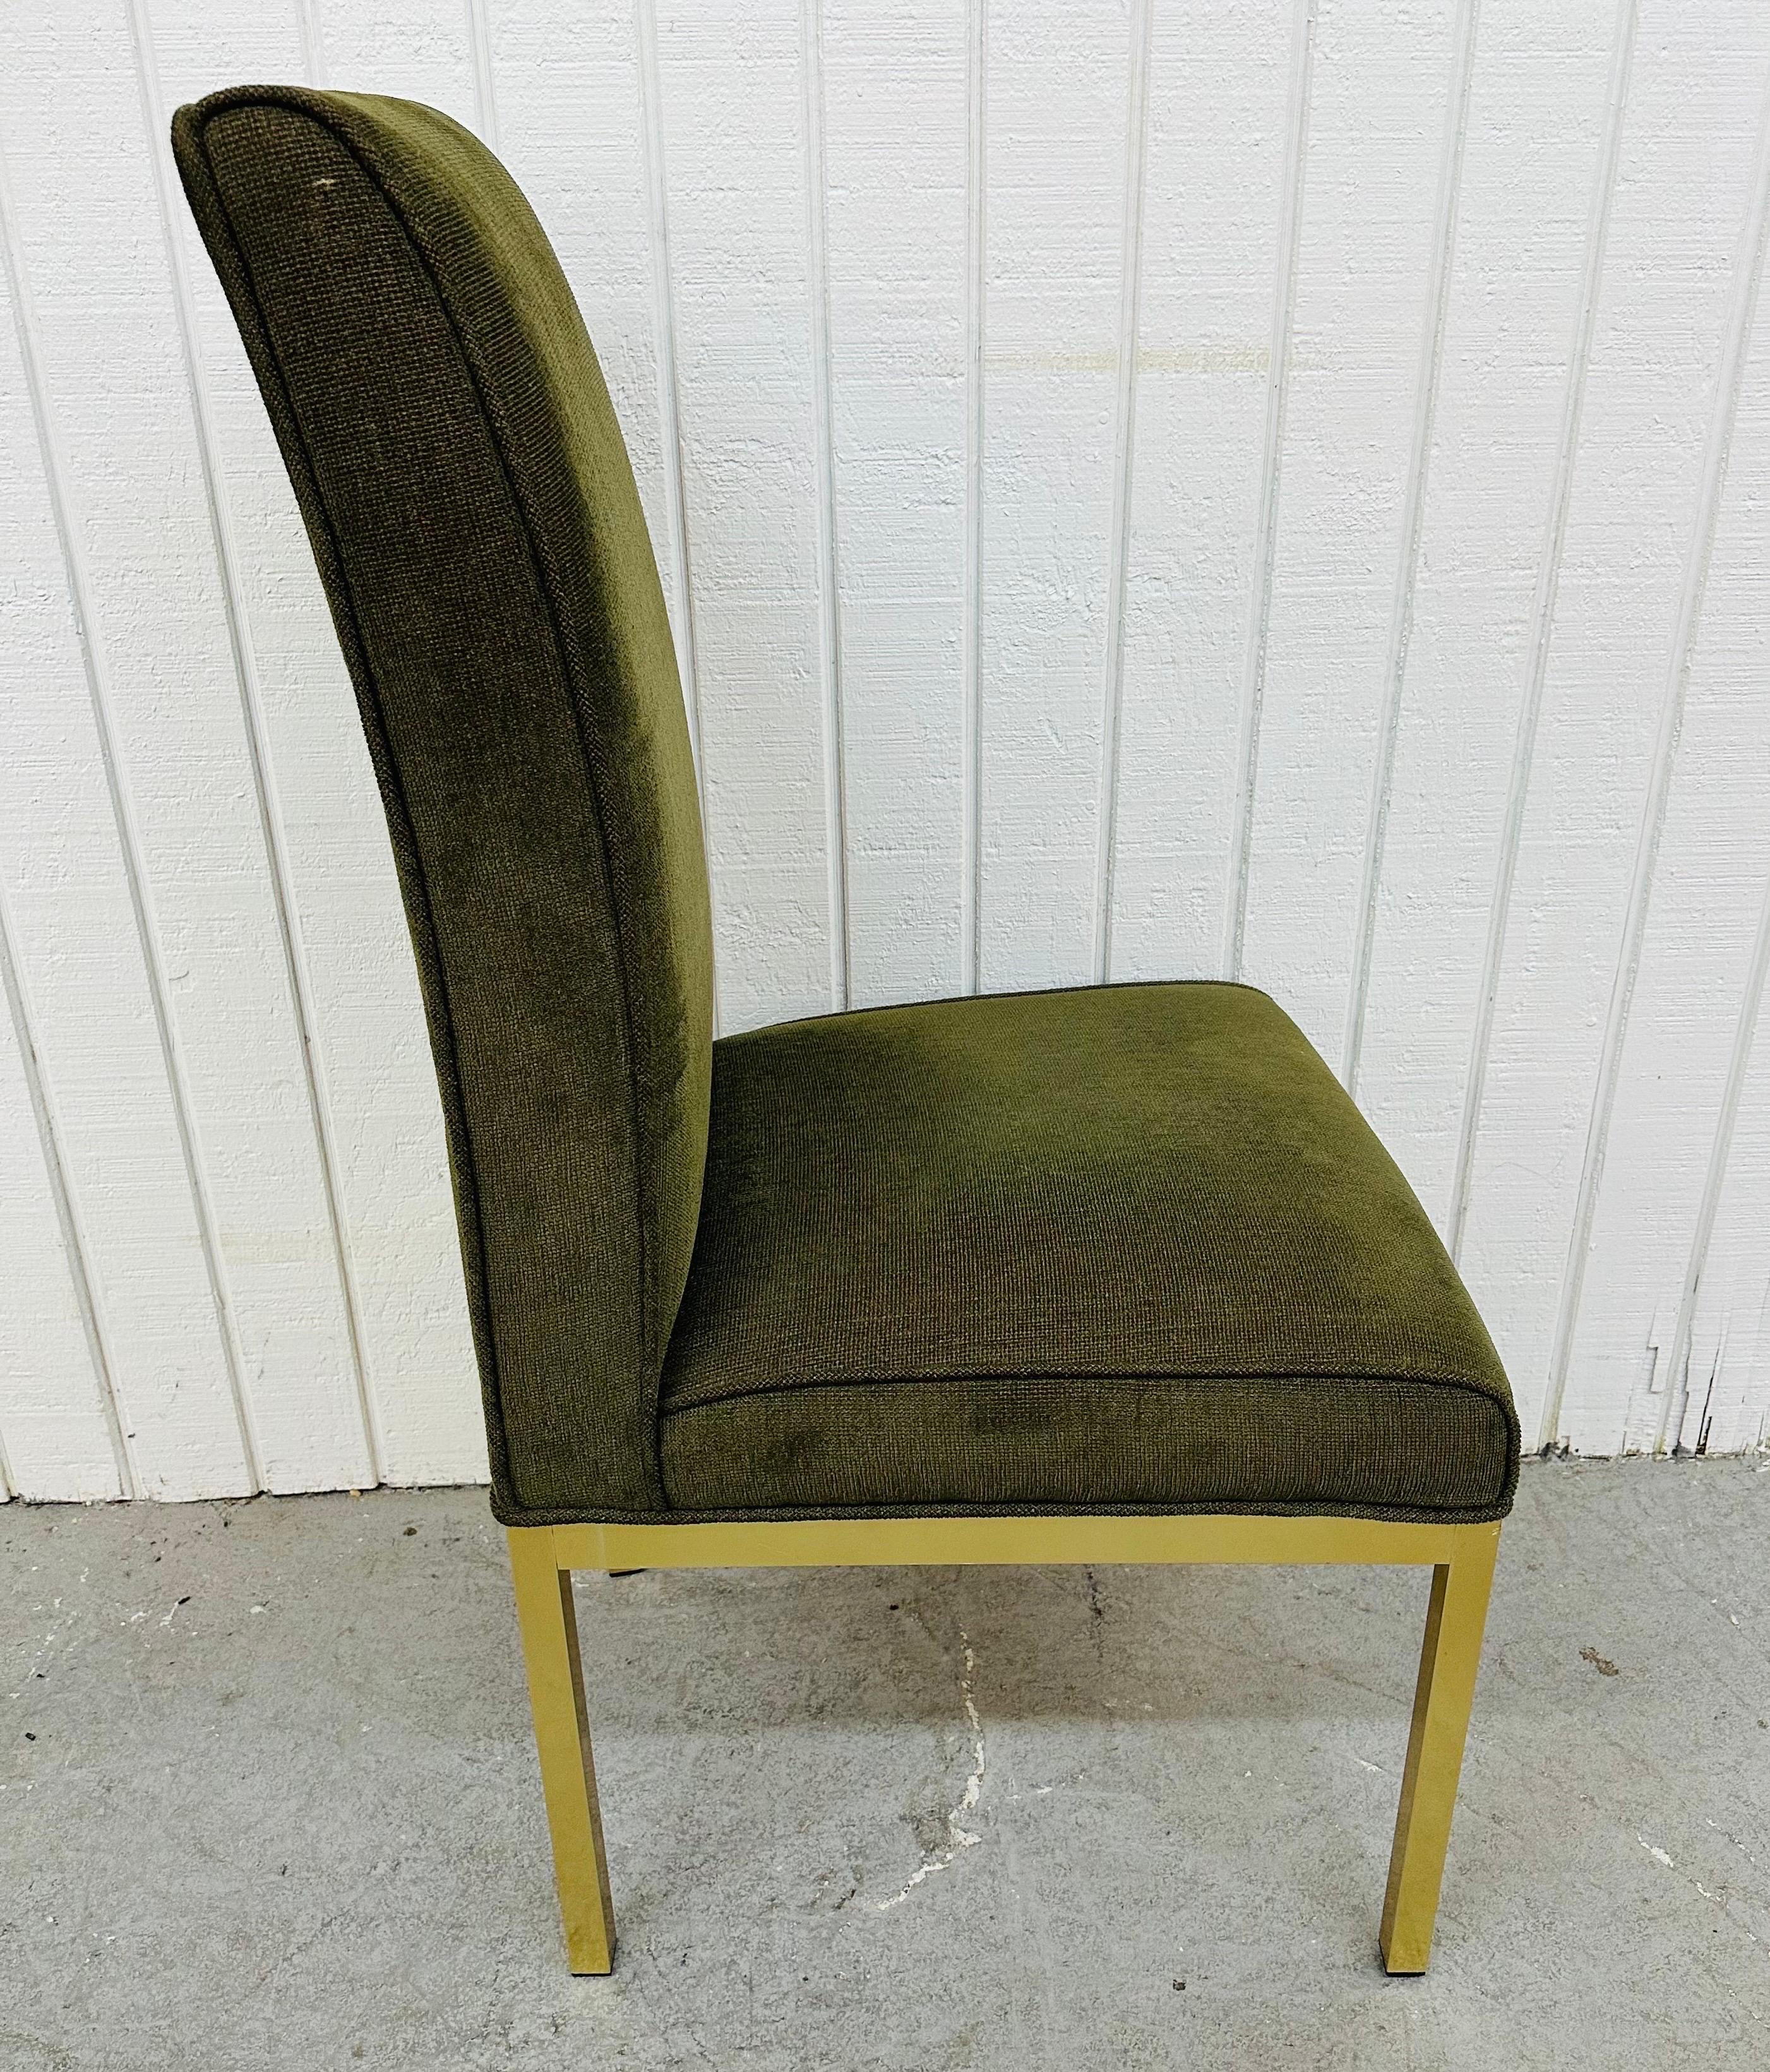 Post Modern Green Upholstered Brass Dining Chairs - Set of 8 In Good Condition For Sale In Clarksboro, NJ